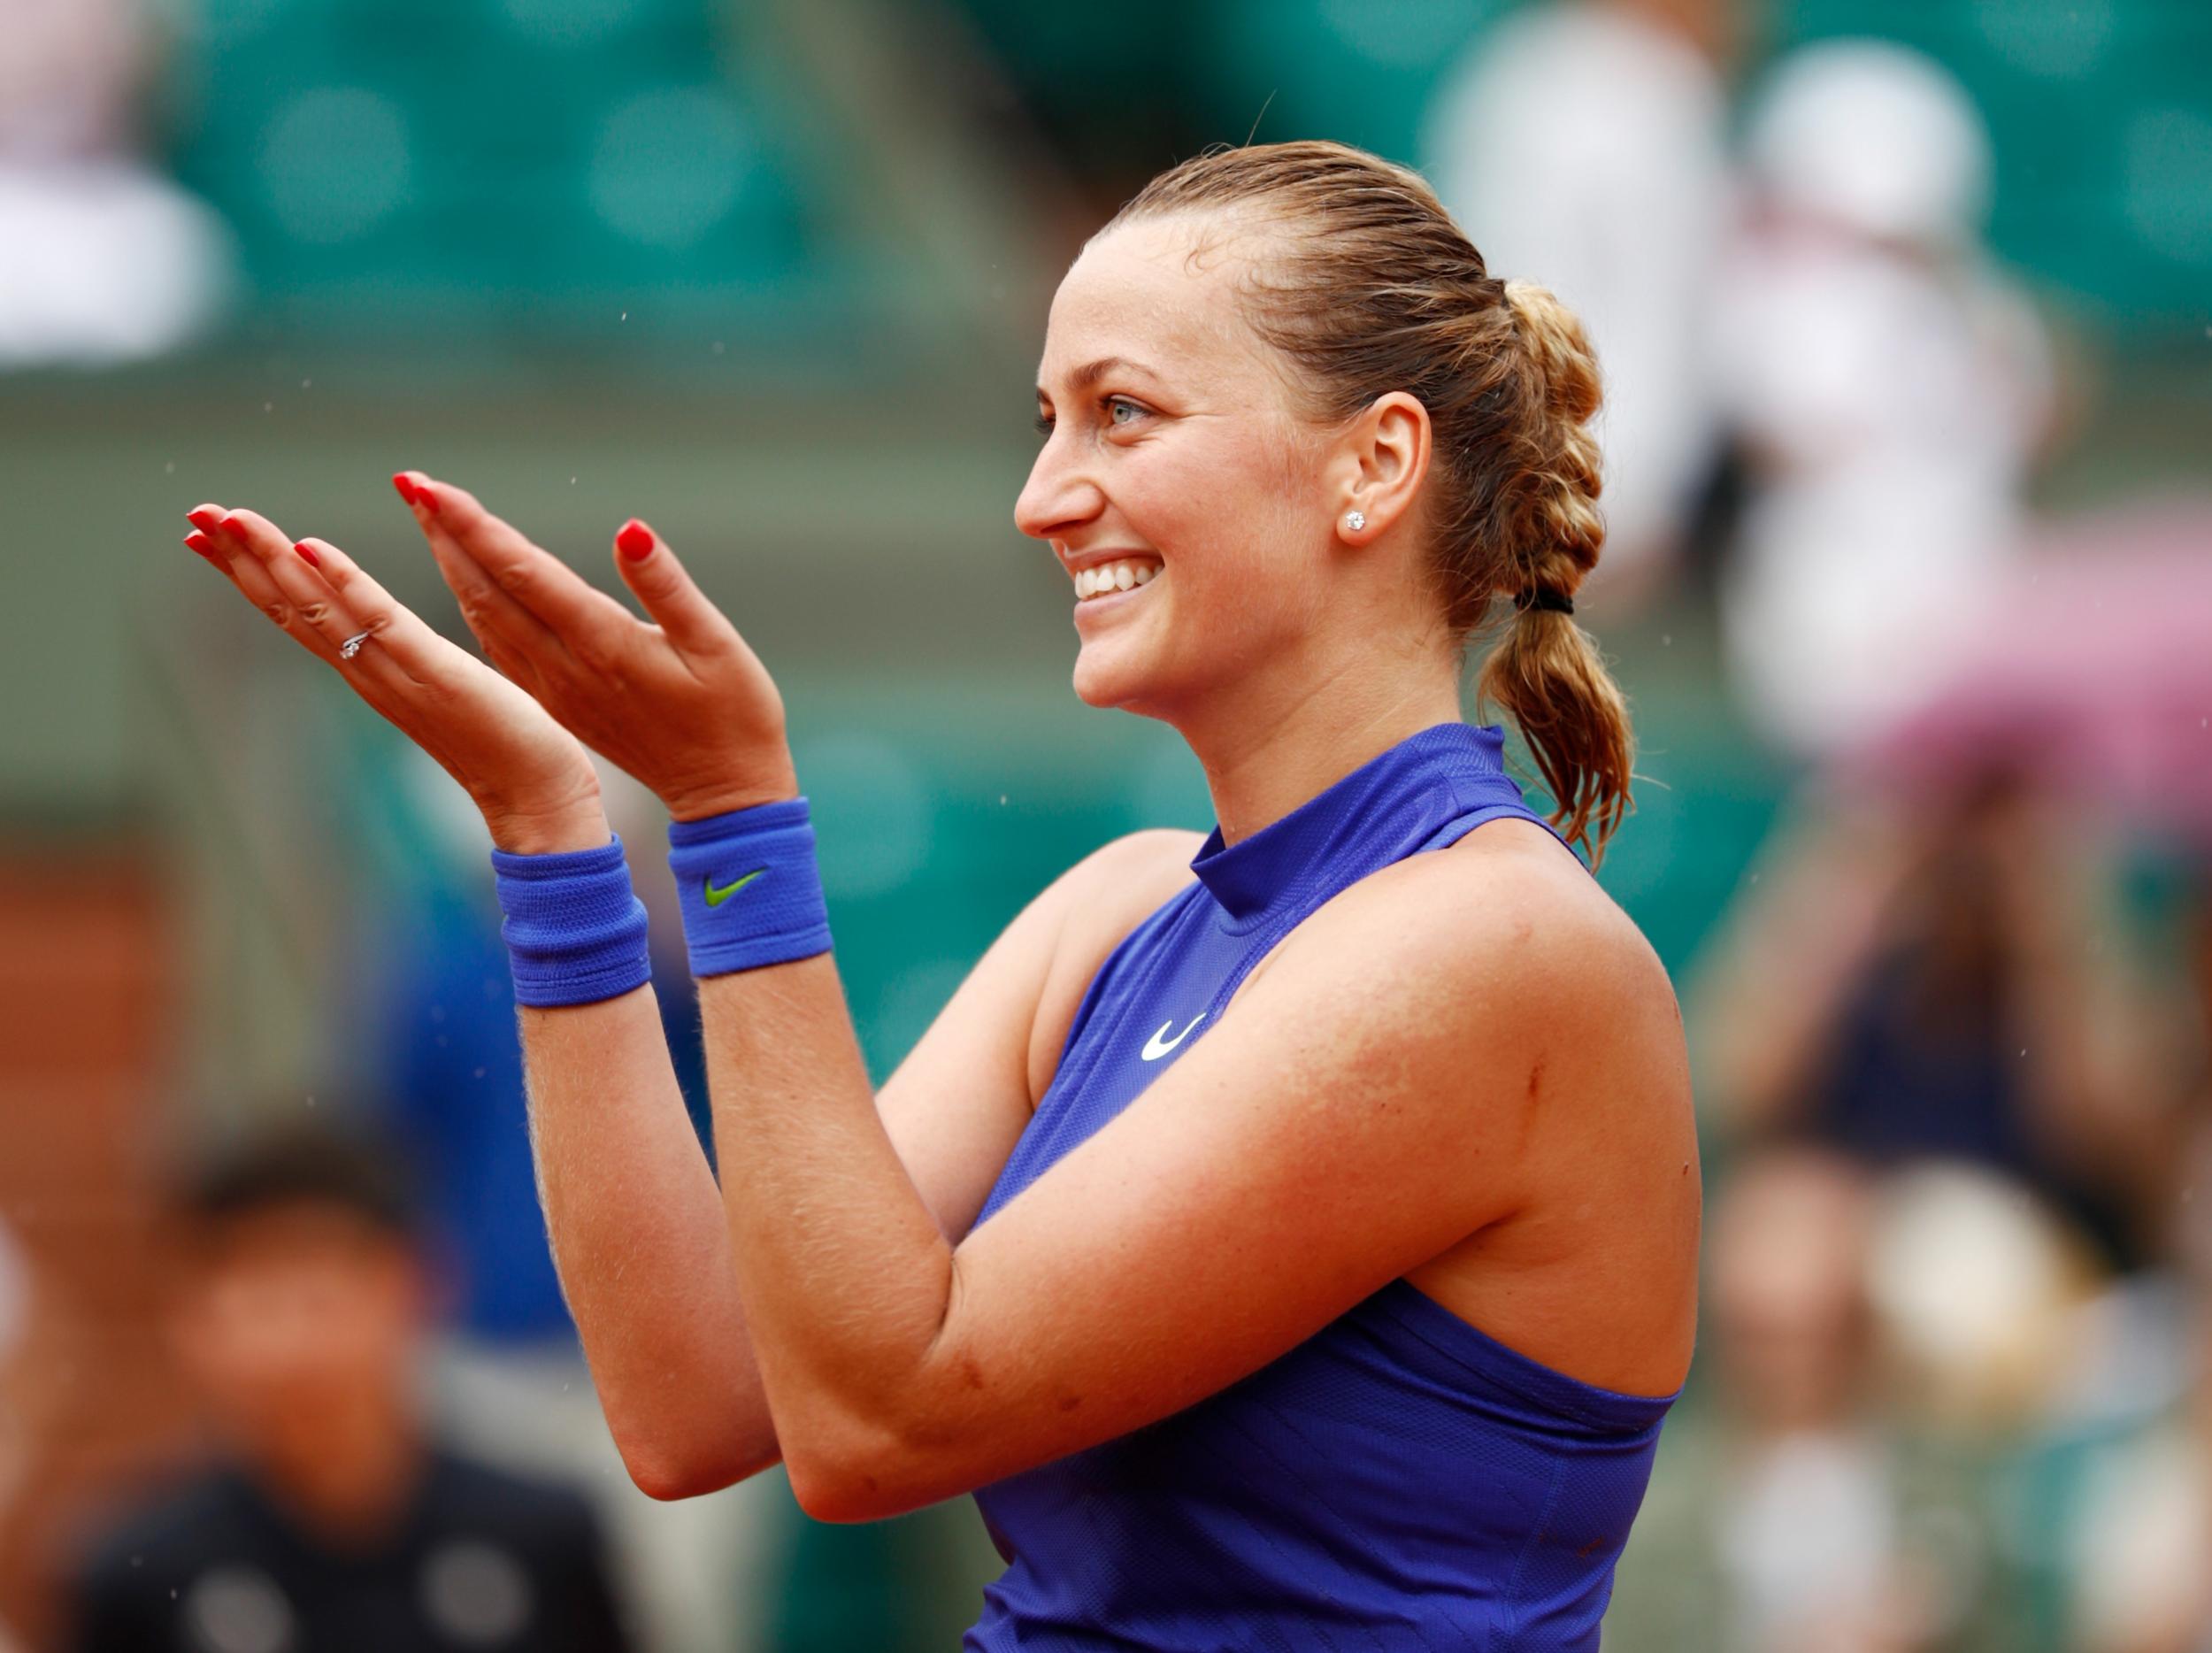 She made her comeback at the French Open